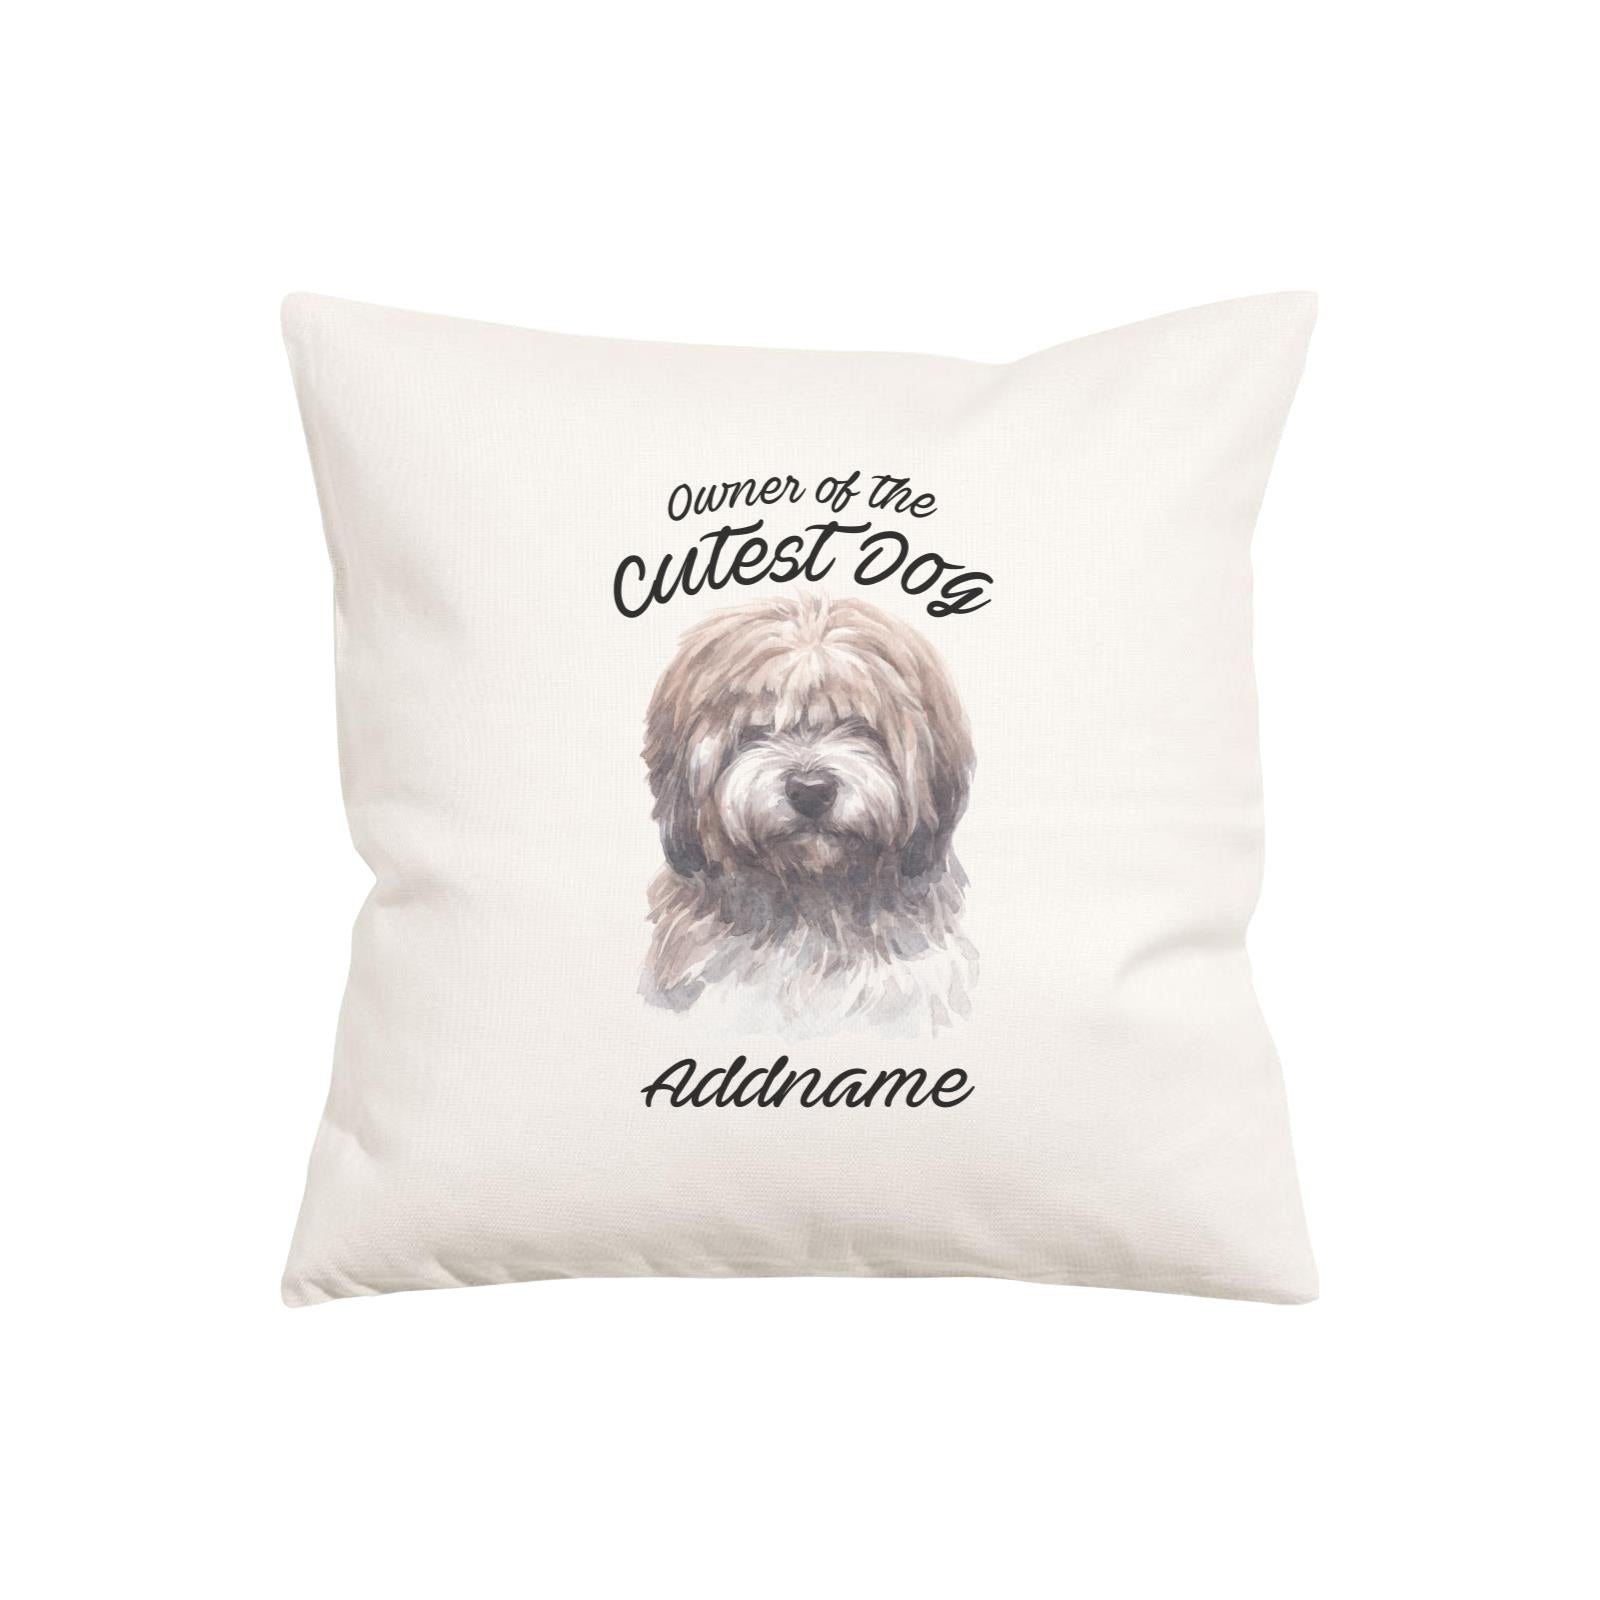 Watercolor Dog Owner Of The Cutest Dog Tibetan Addname Pillow Cushion